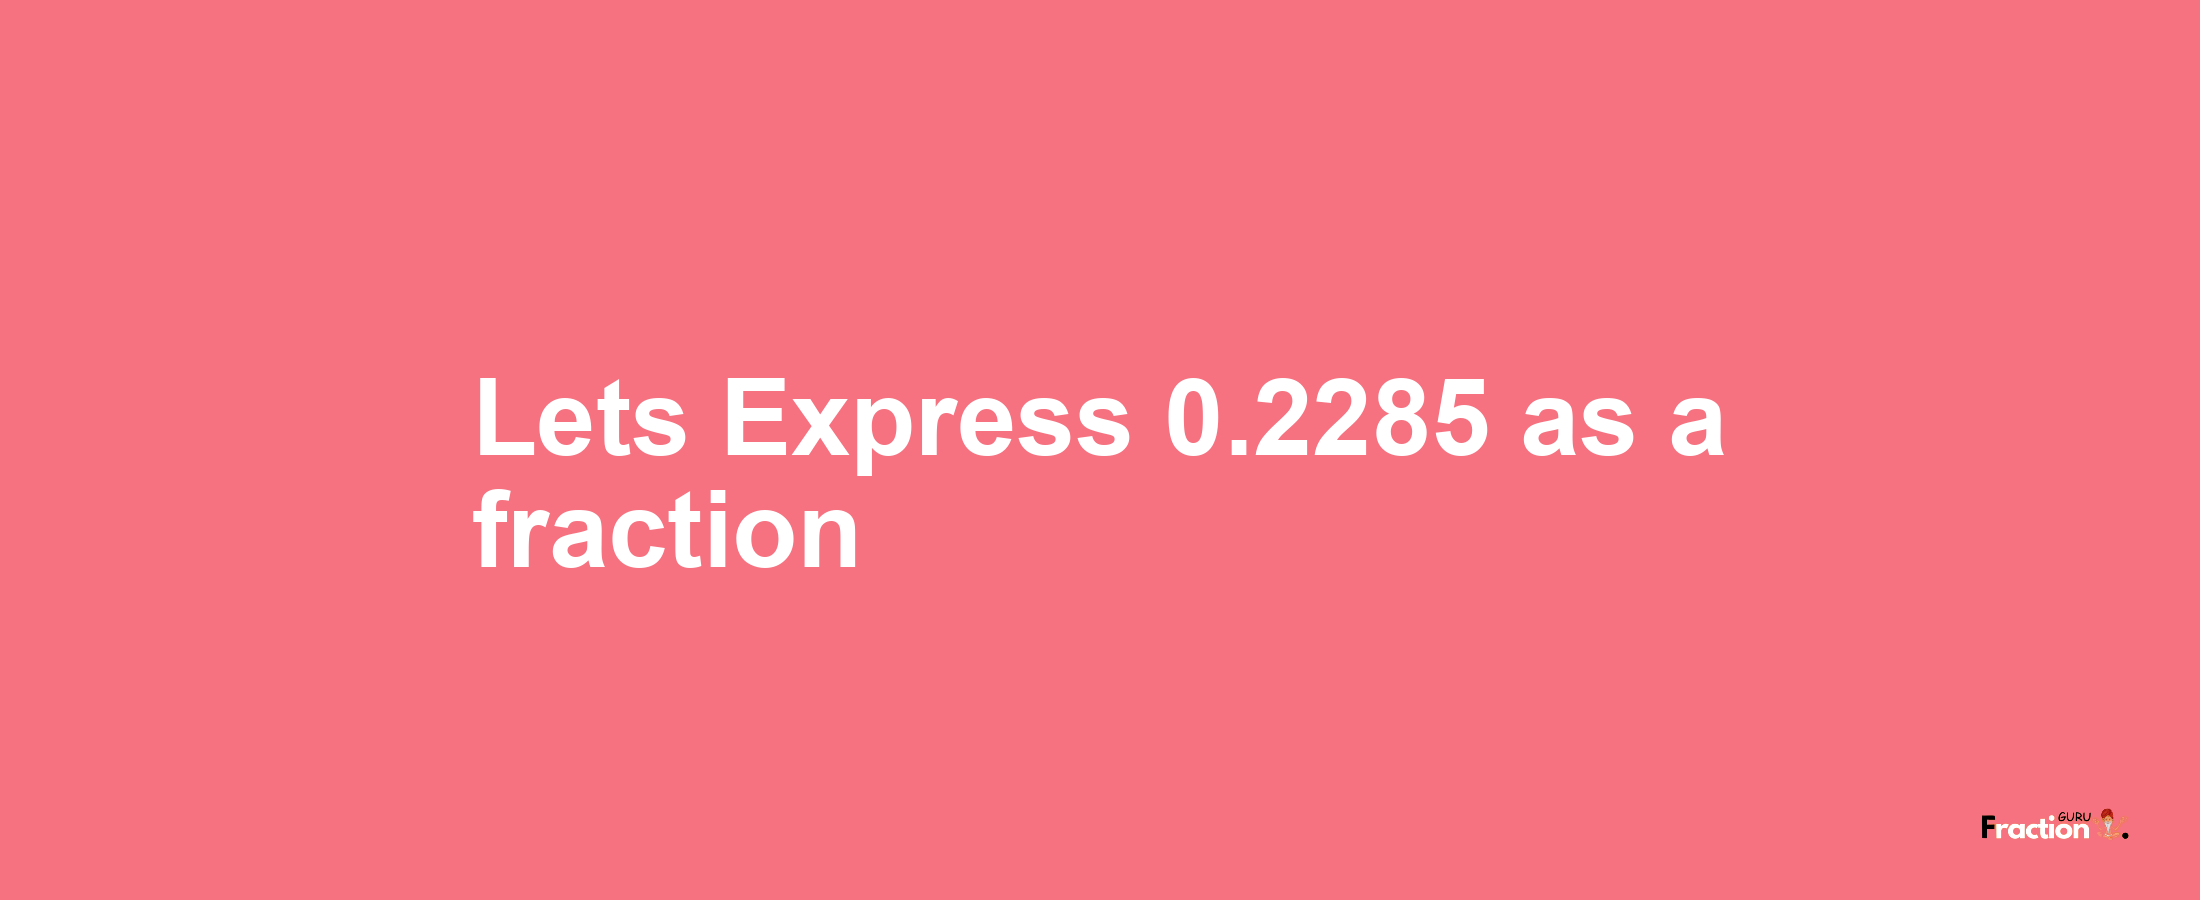 Lets Express 0.2285 as afraction